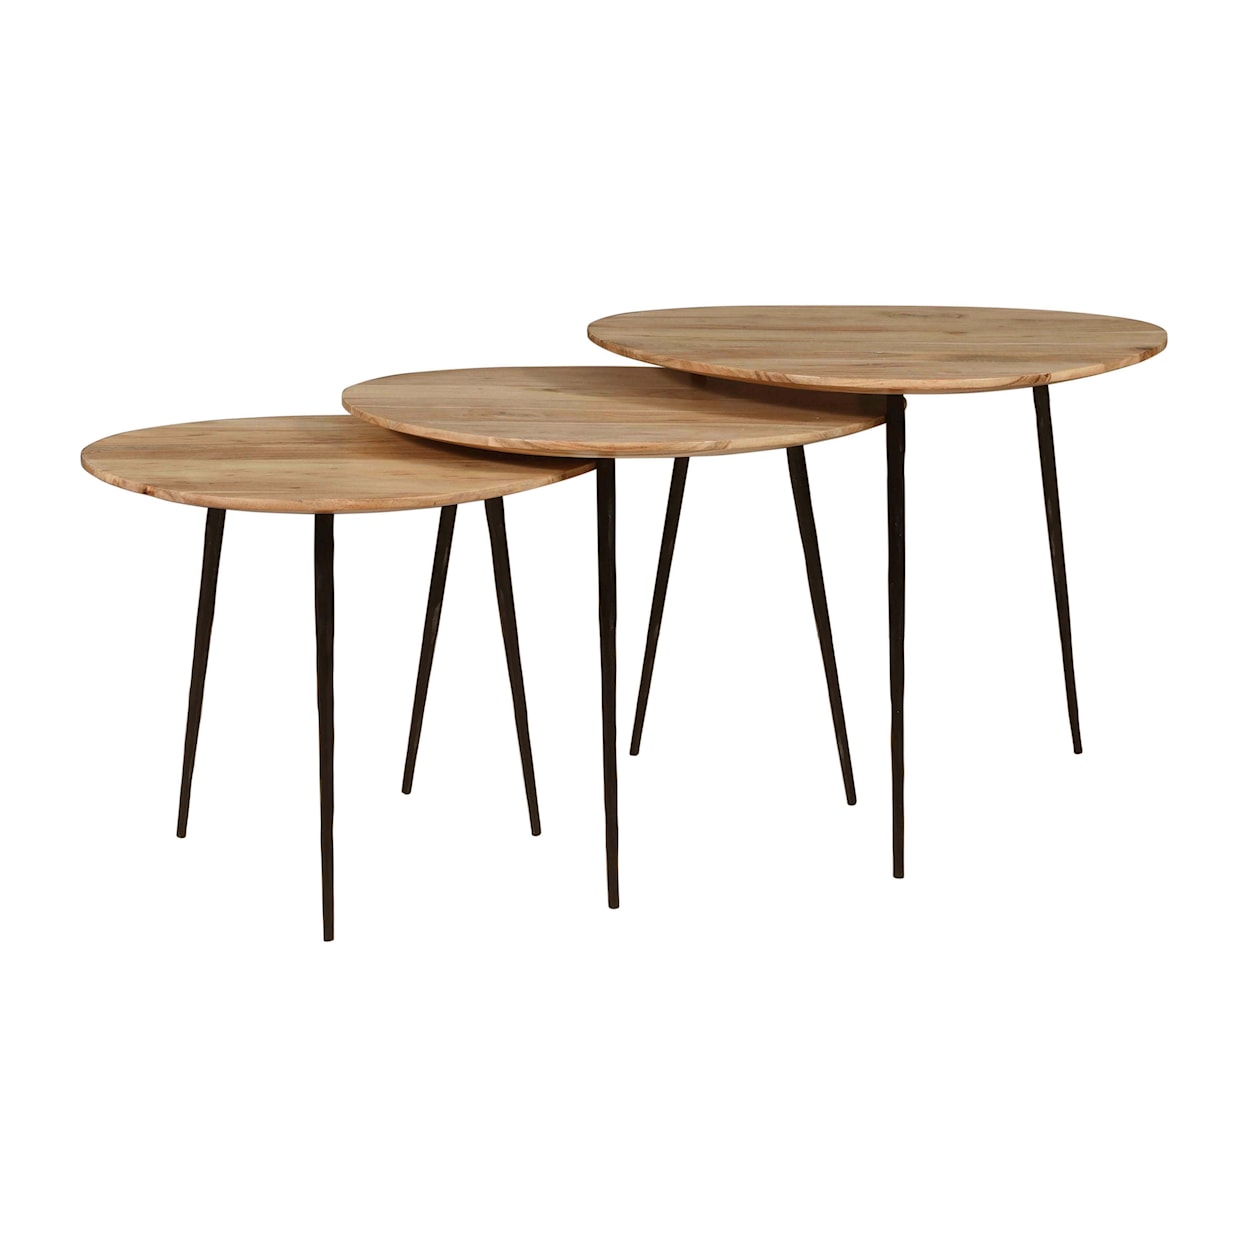 VFM Signature Reeves Nesting Table - Set of 3 - Natural